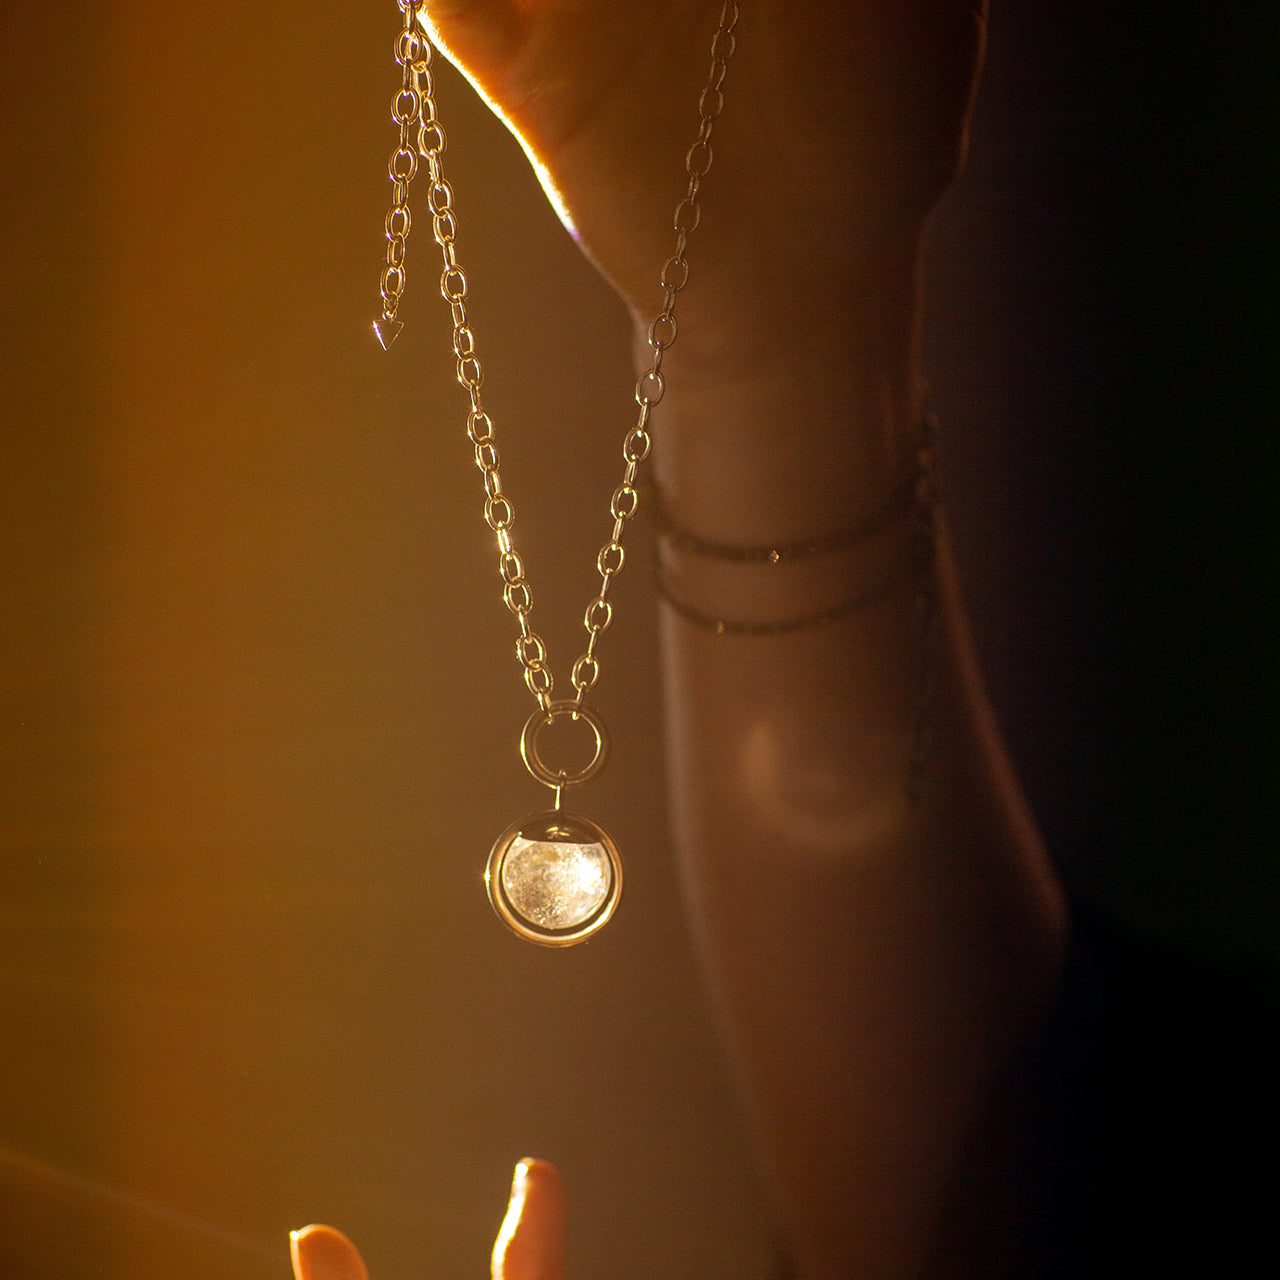 Emily Eliza Arlotte Handcrafted Fine Jewellery Magical Image of Hands Holding Sterling Silver Handmade Necklace with Crystal Ball Fortune Teller Vibes Mystical Boho Witchy Chunky Chain Made in Tasmania Australia Photography by Cassie Sullivan